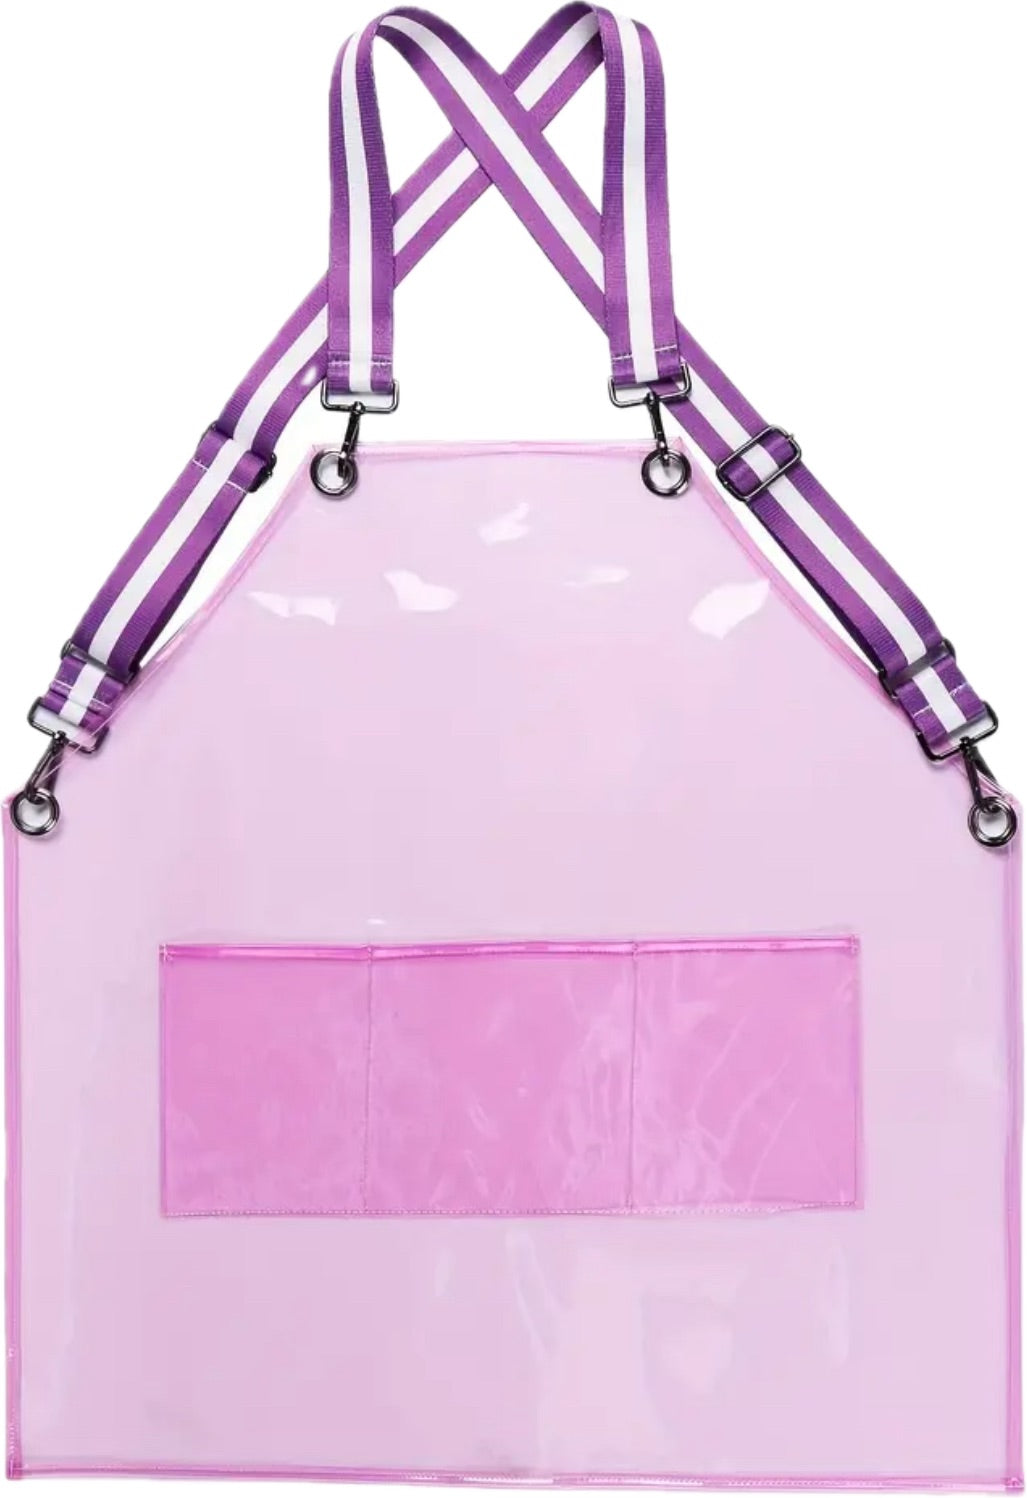 Waterproof Apron with Pocket - Pink